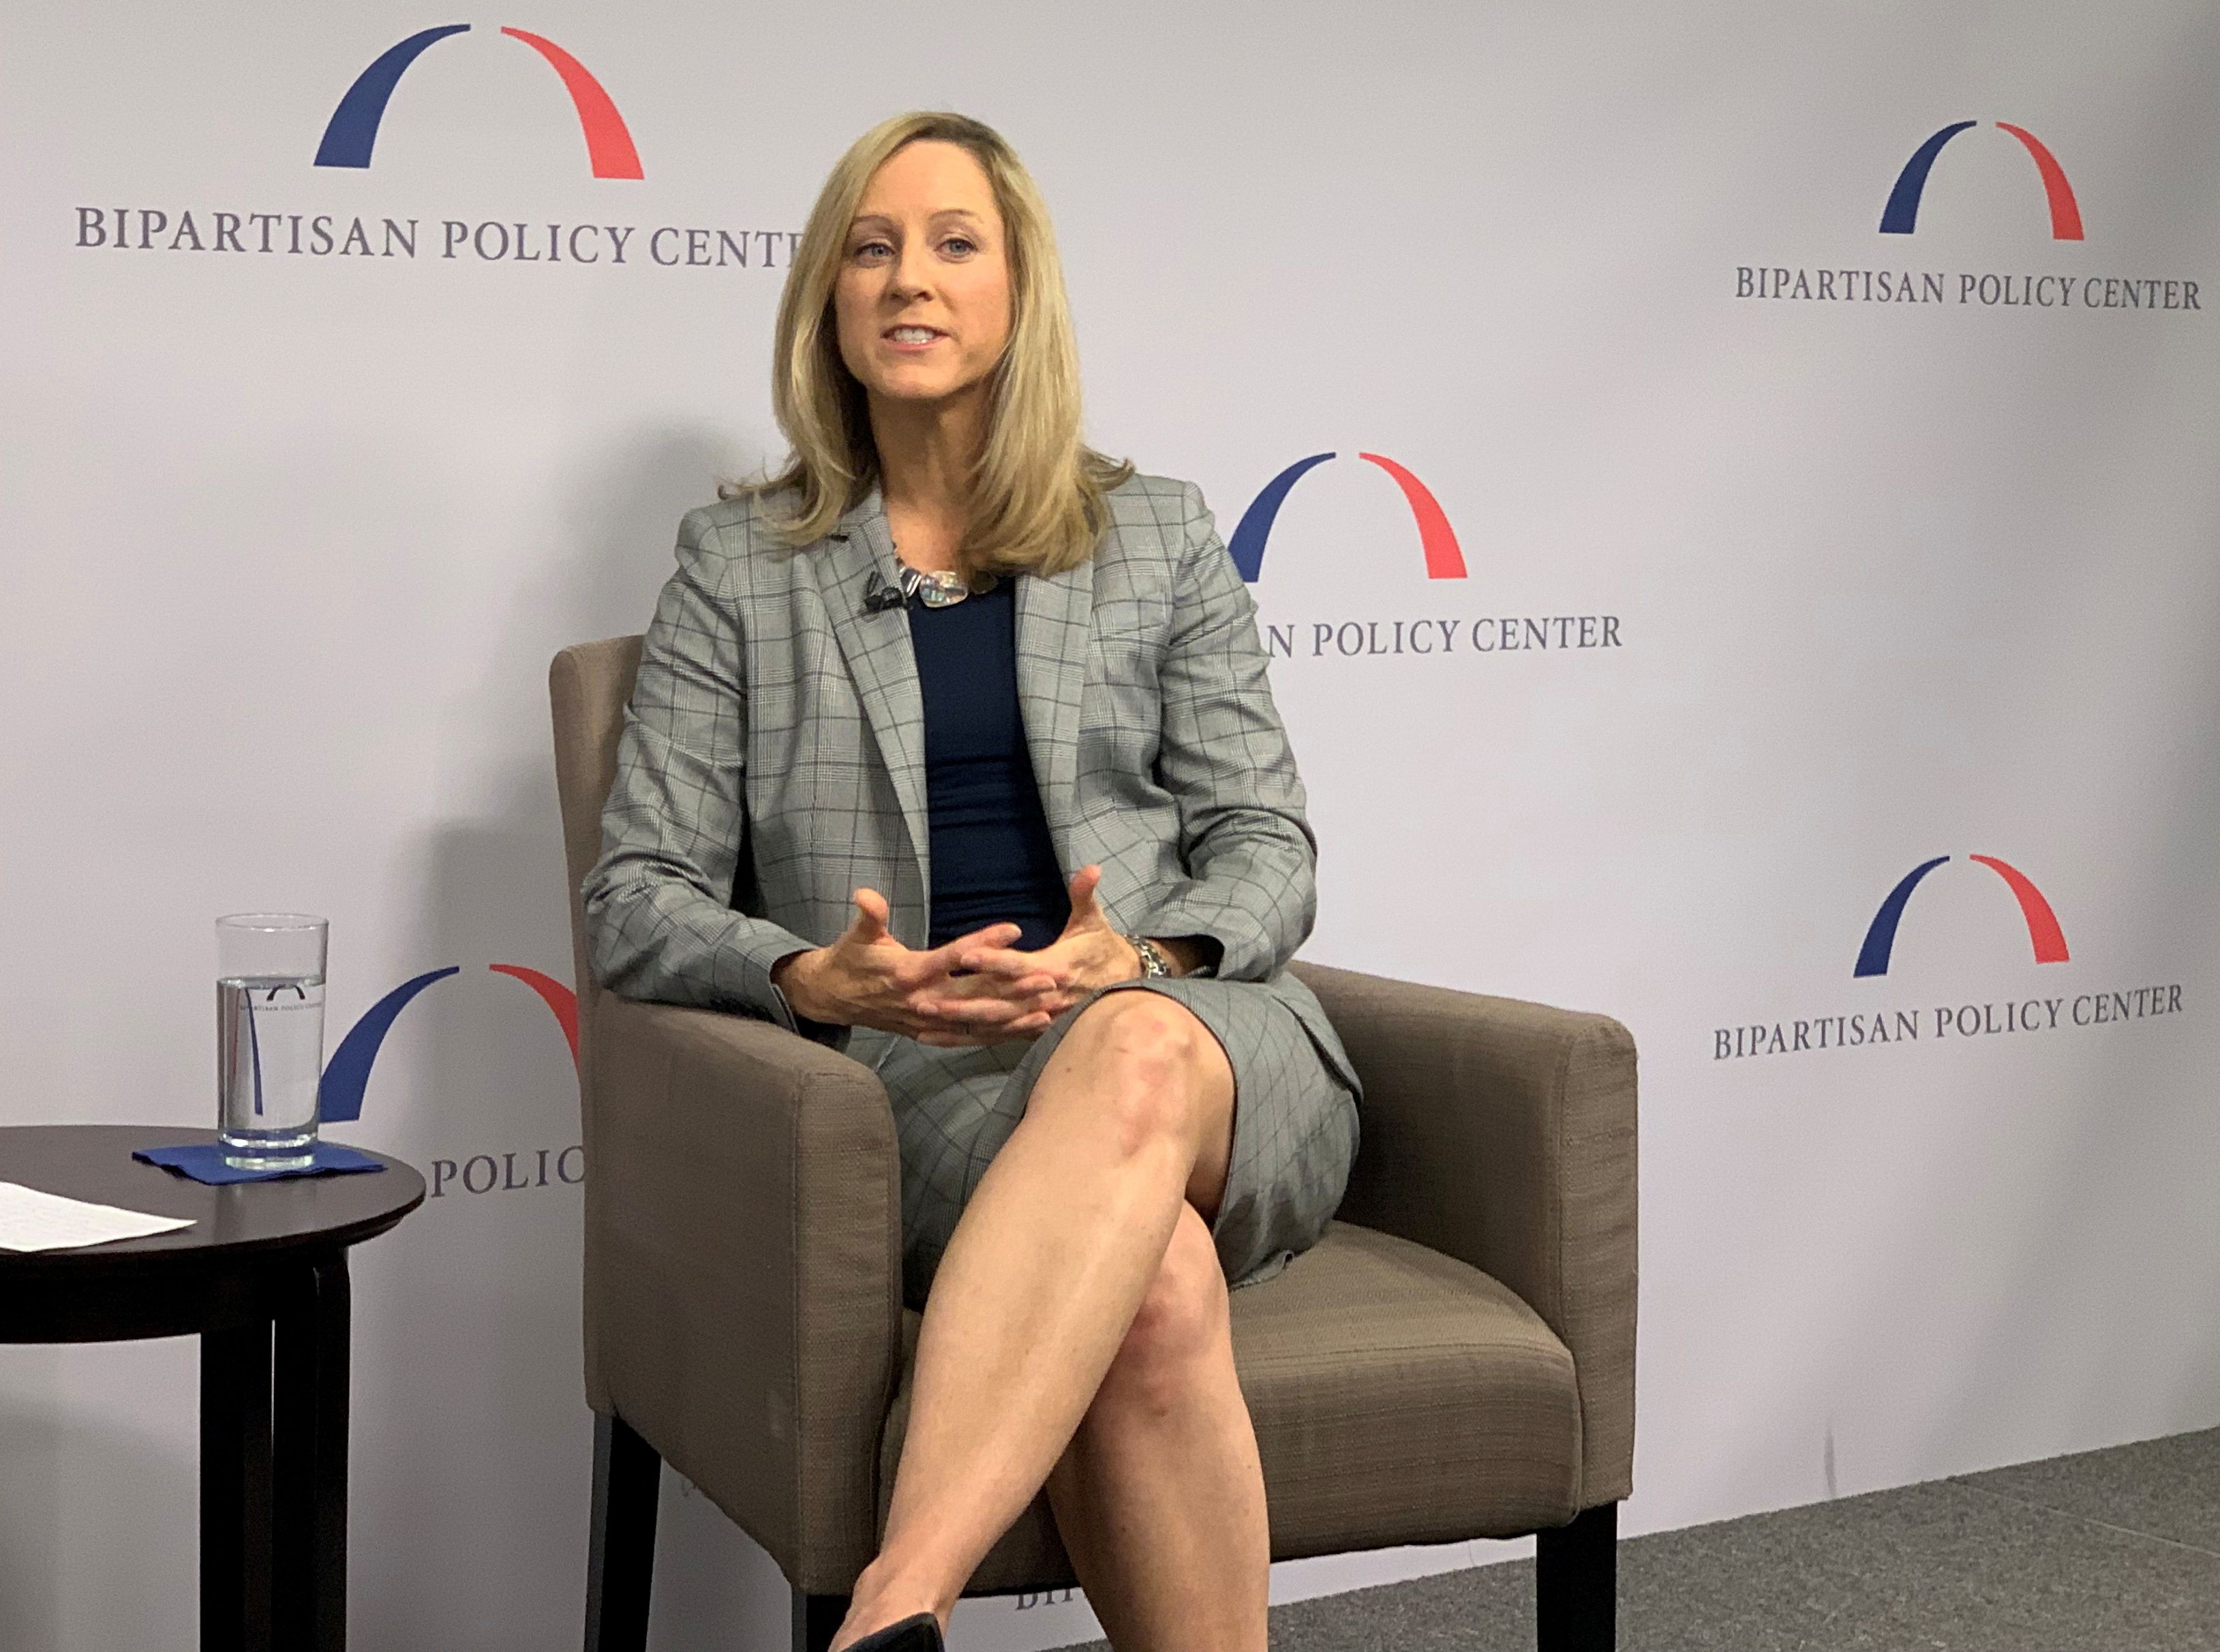 Kathy Kraninger speaks to an audience on her first set of regulatory priorities as director of the Consumer Financial Protection Bureau in Washington